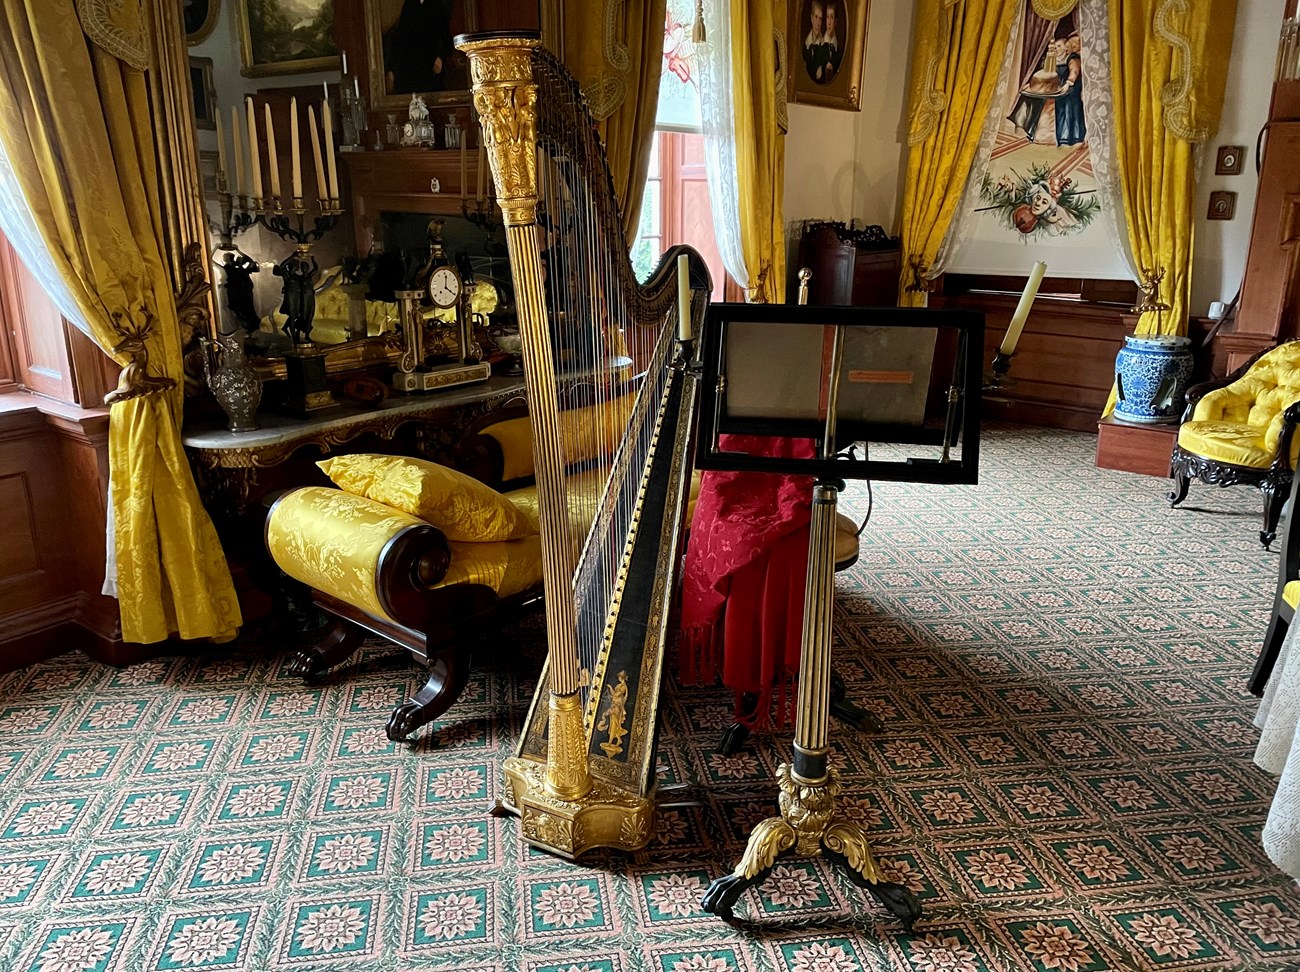 Erard harp on display in music room, post-conservation